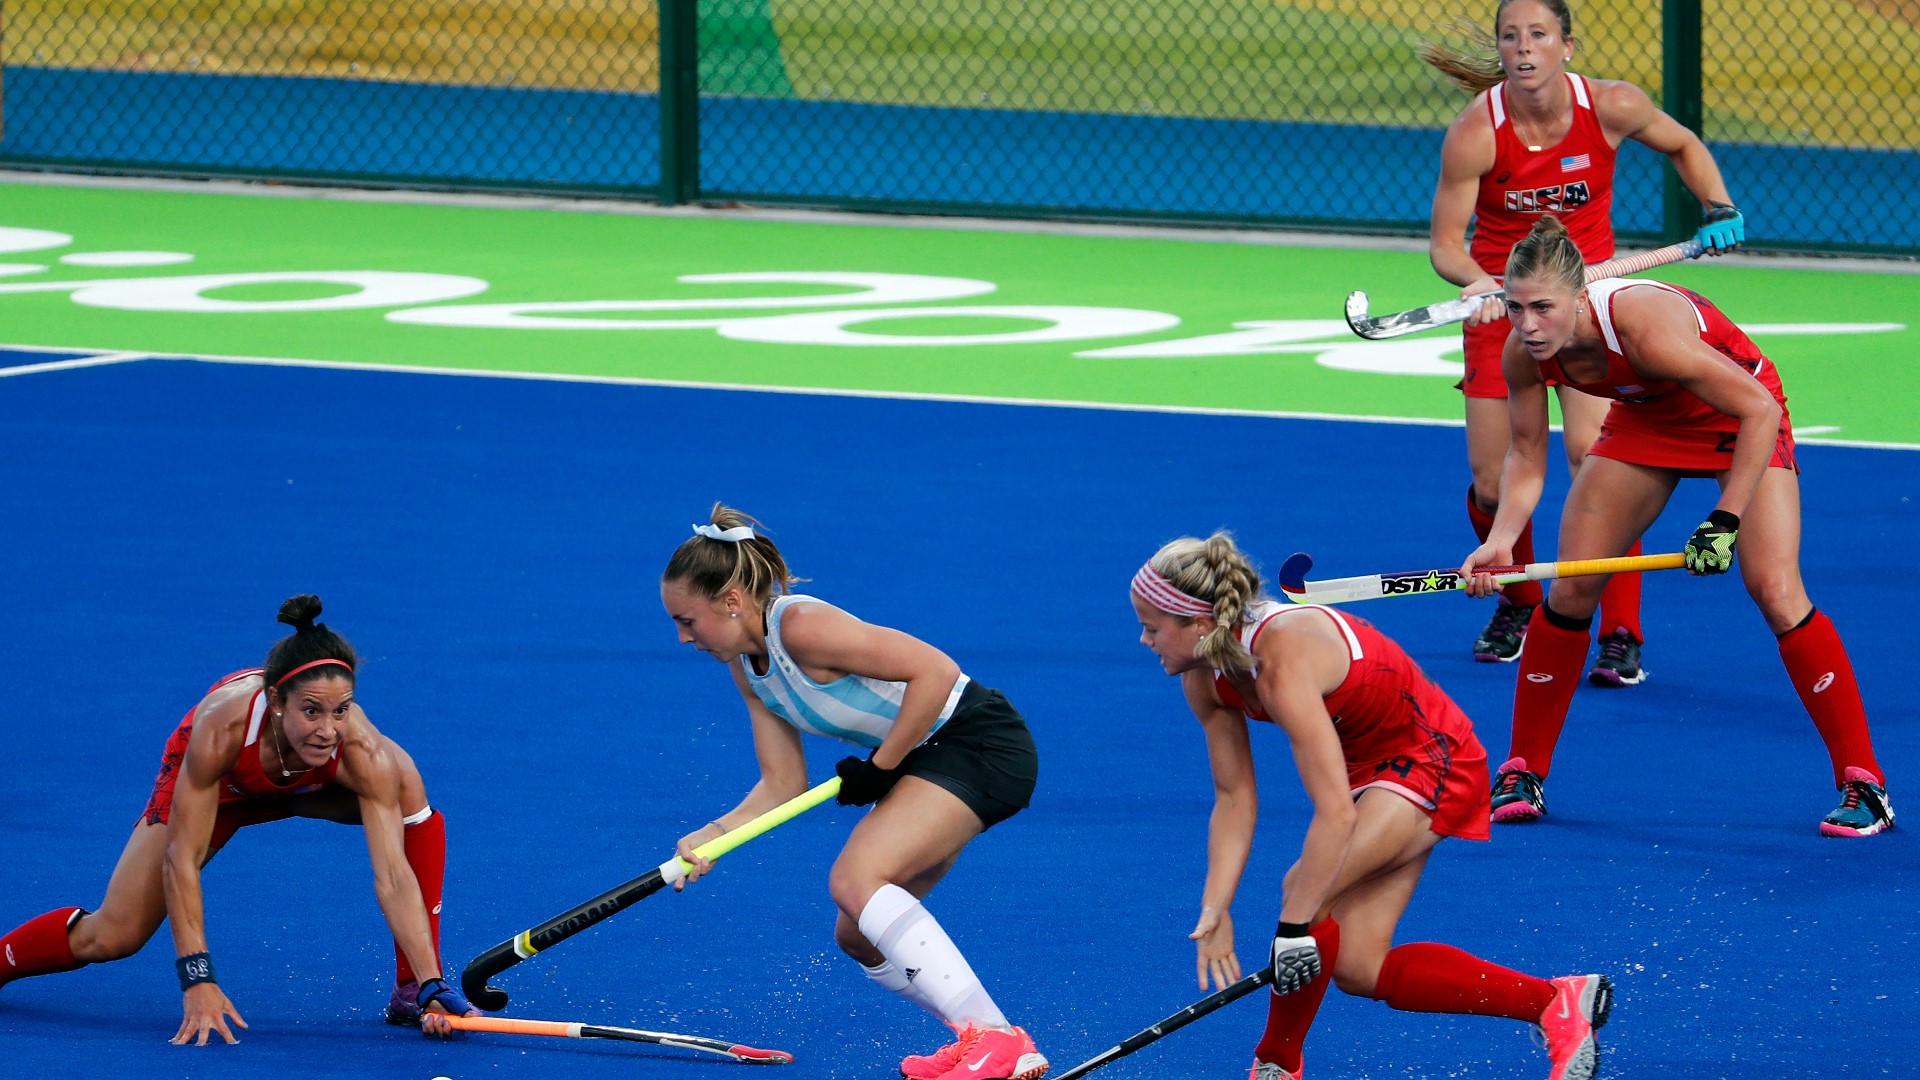 Maddie Zimmer, of Hershey, has qualified with Team USA Field Hockey for the upcoming Olympics in Paris.